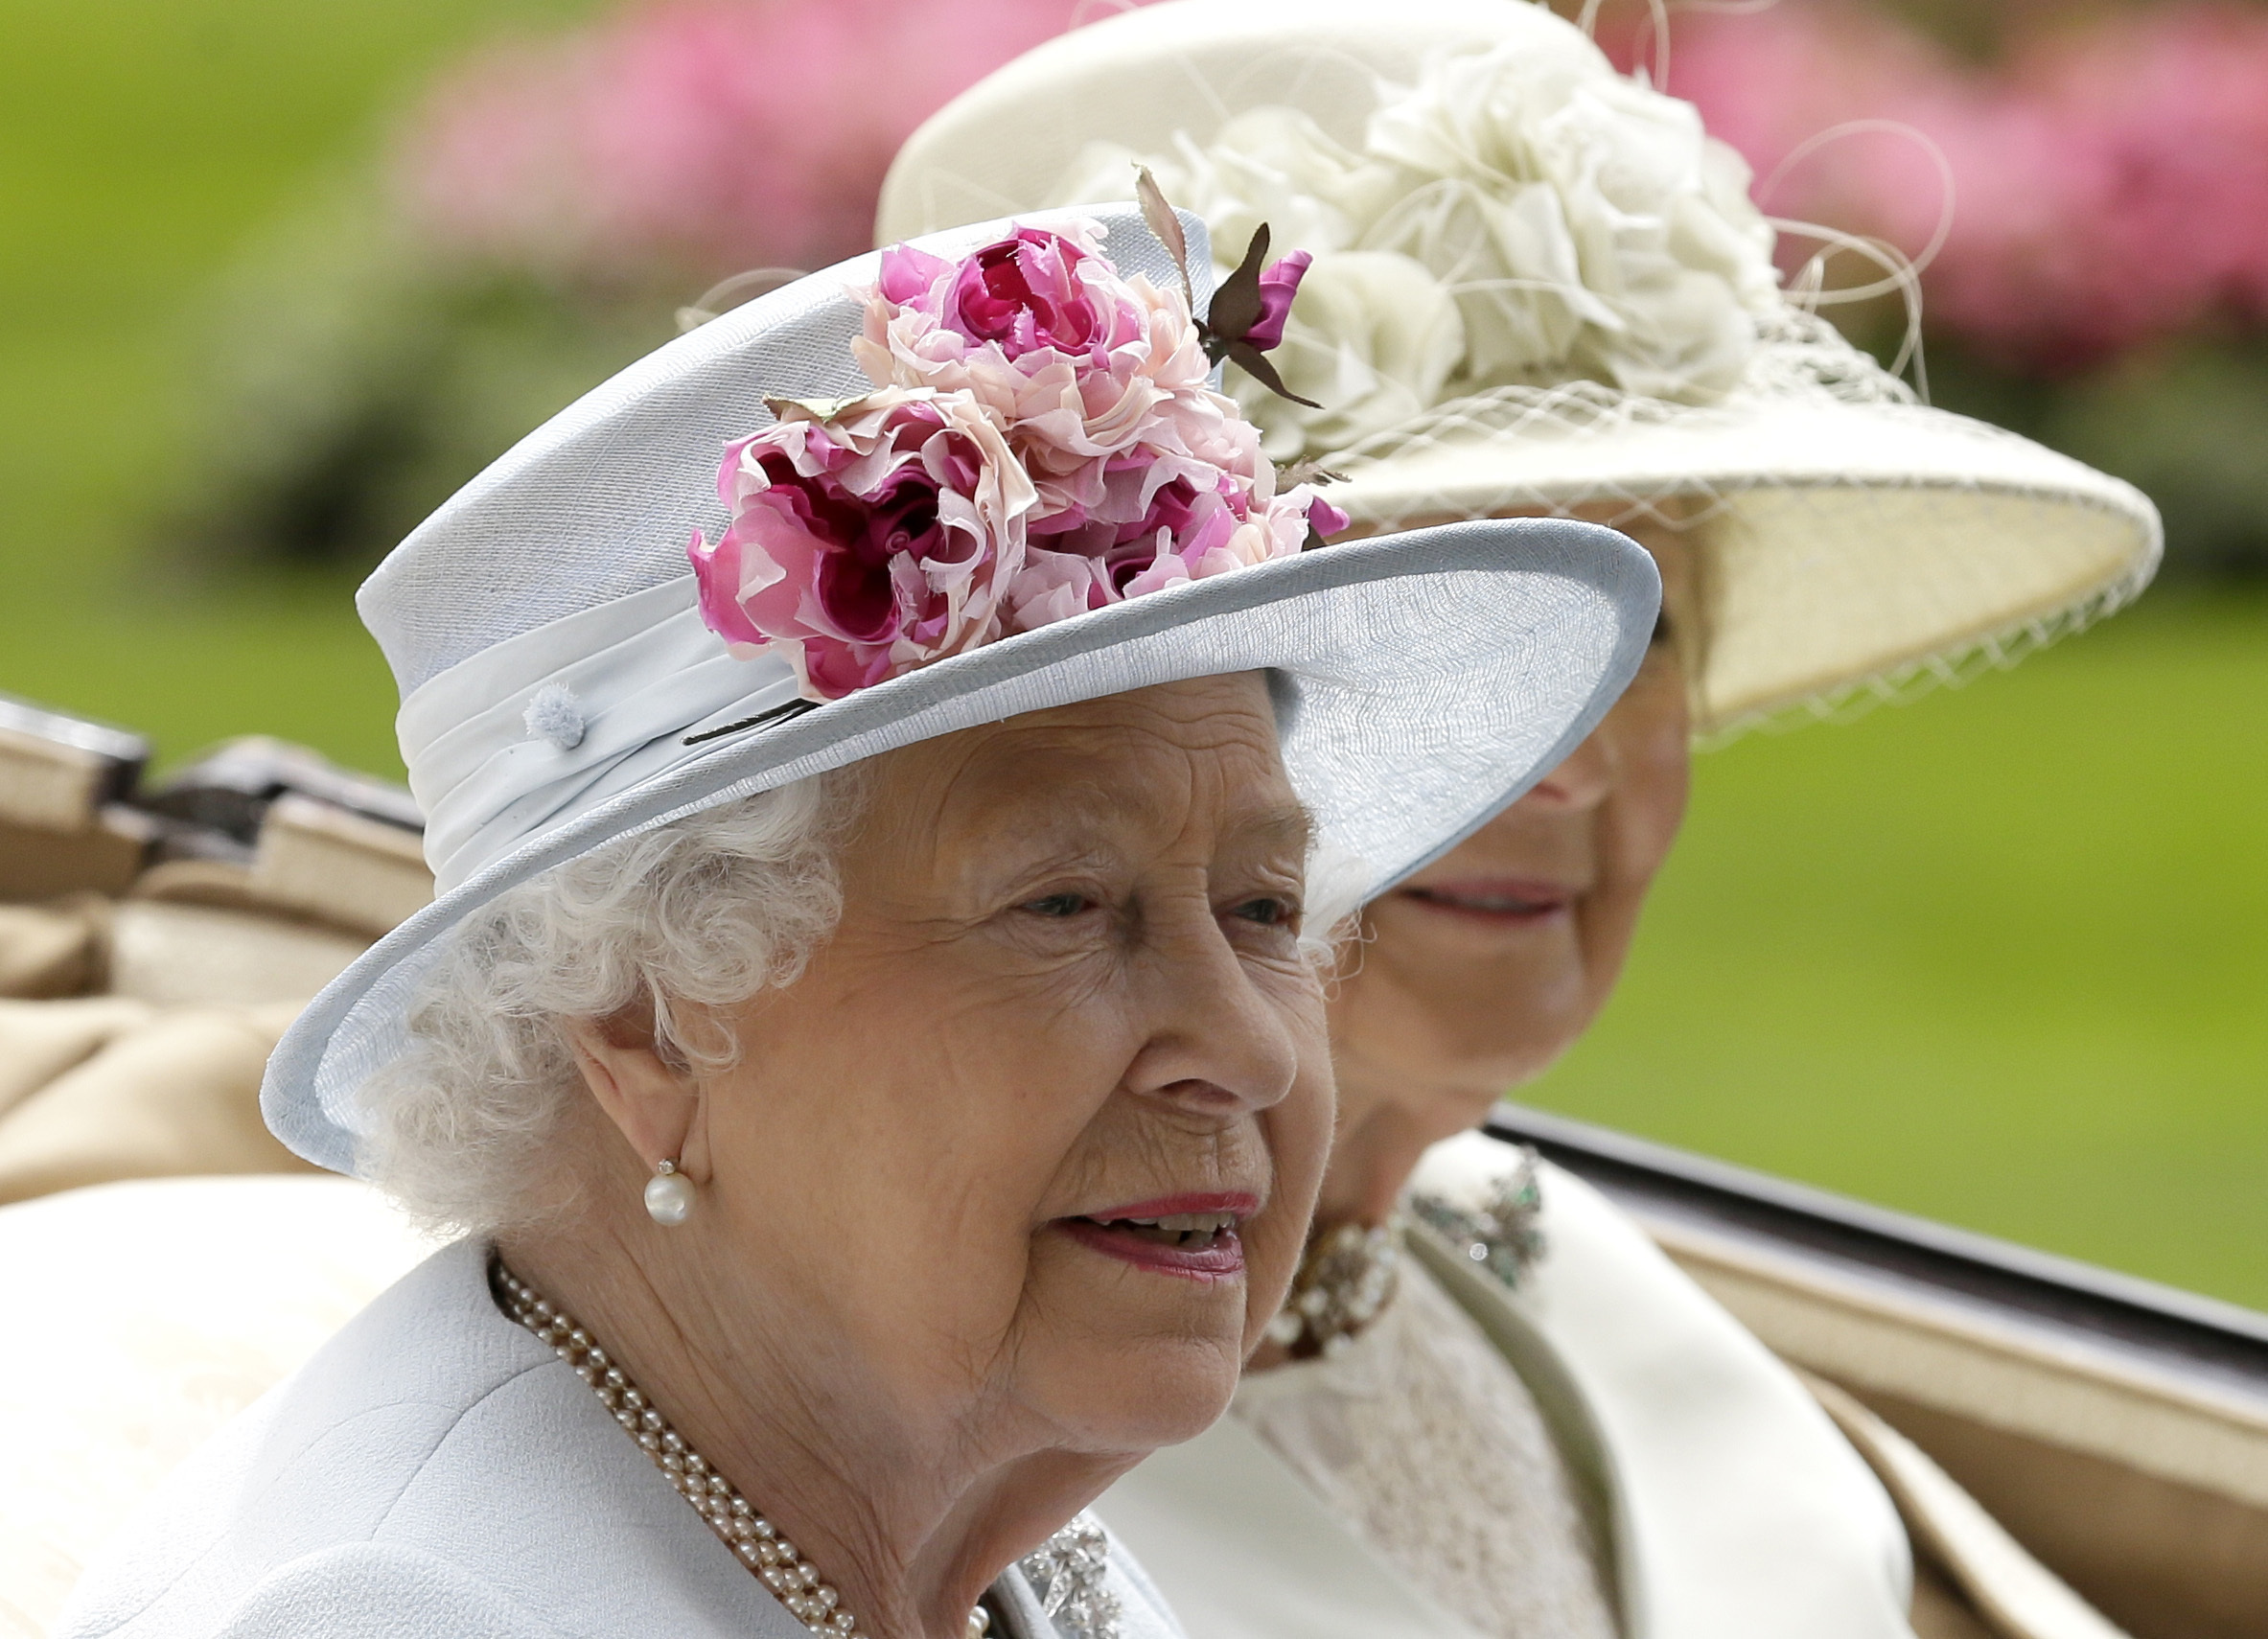 FILE - Britain's Queen Elizabeth II arrives at the parade ring with Princess Alexandra in a horse drawn carriage, on the second day of the Royal Ascot horse race meeting in Ascot, England, Wednesday, June 20, 2018. Queen Elizabeth II is marking her 96th birthday privately on Thursday, April 21, 2022 retreating to the Sandringham estate in eastern England that has offered the monarch and her late husband, Prince Philip, a refuge from the affairs of state. (AP Photo/Tim Ireland, File)